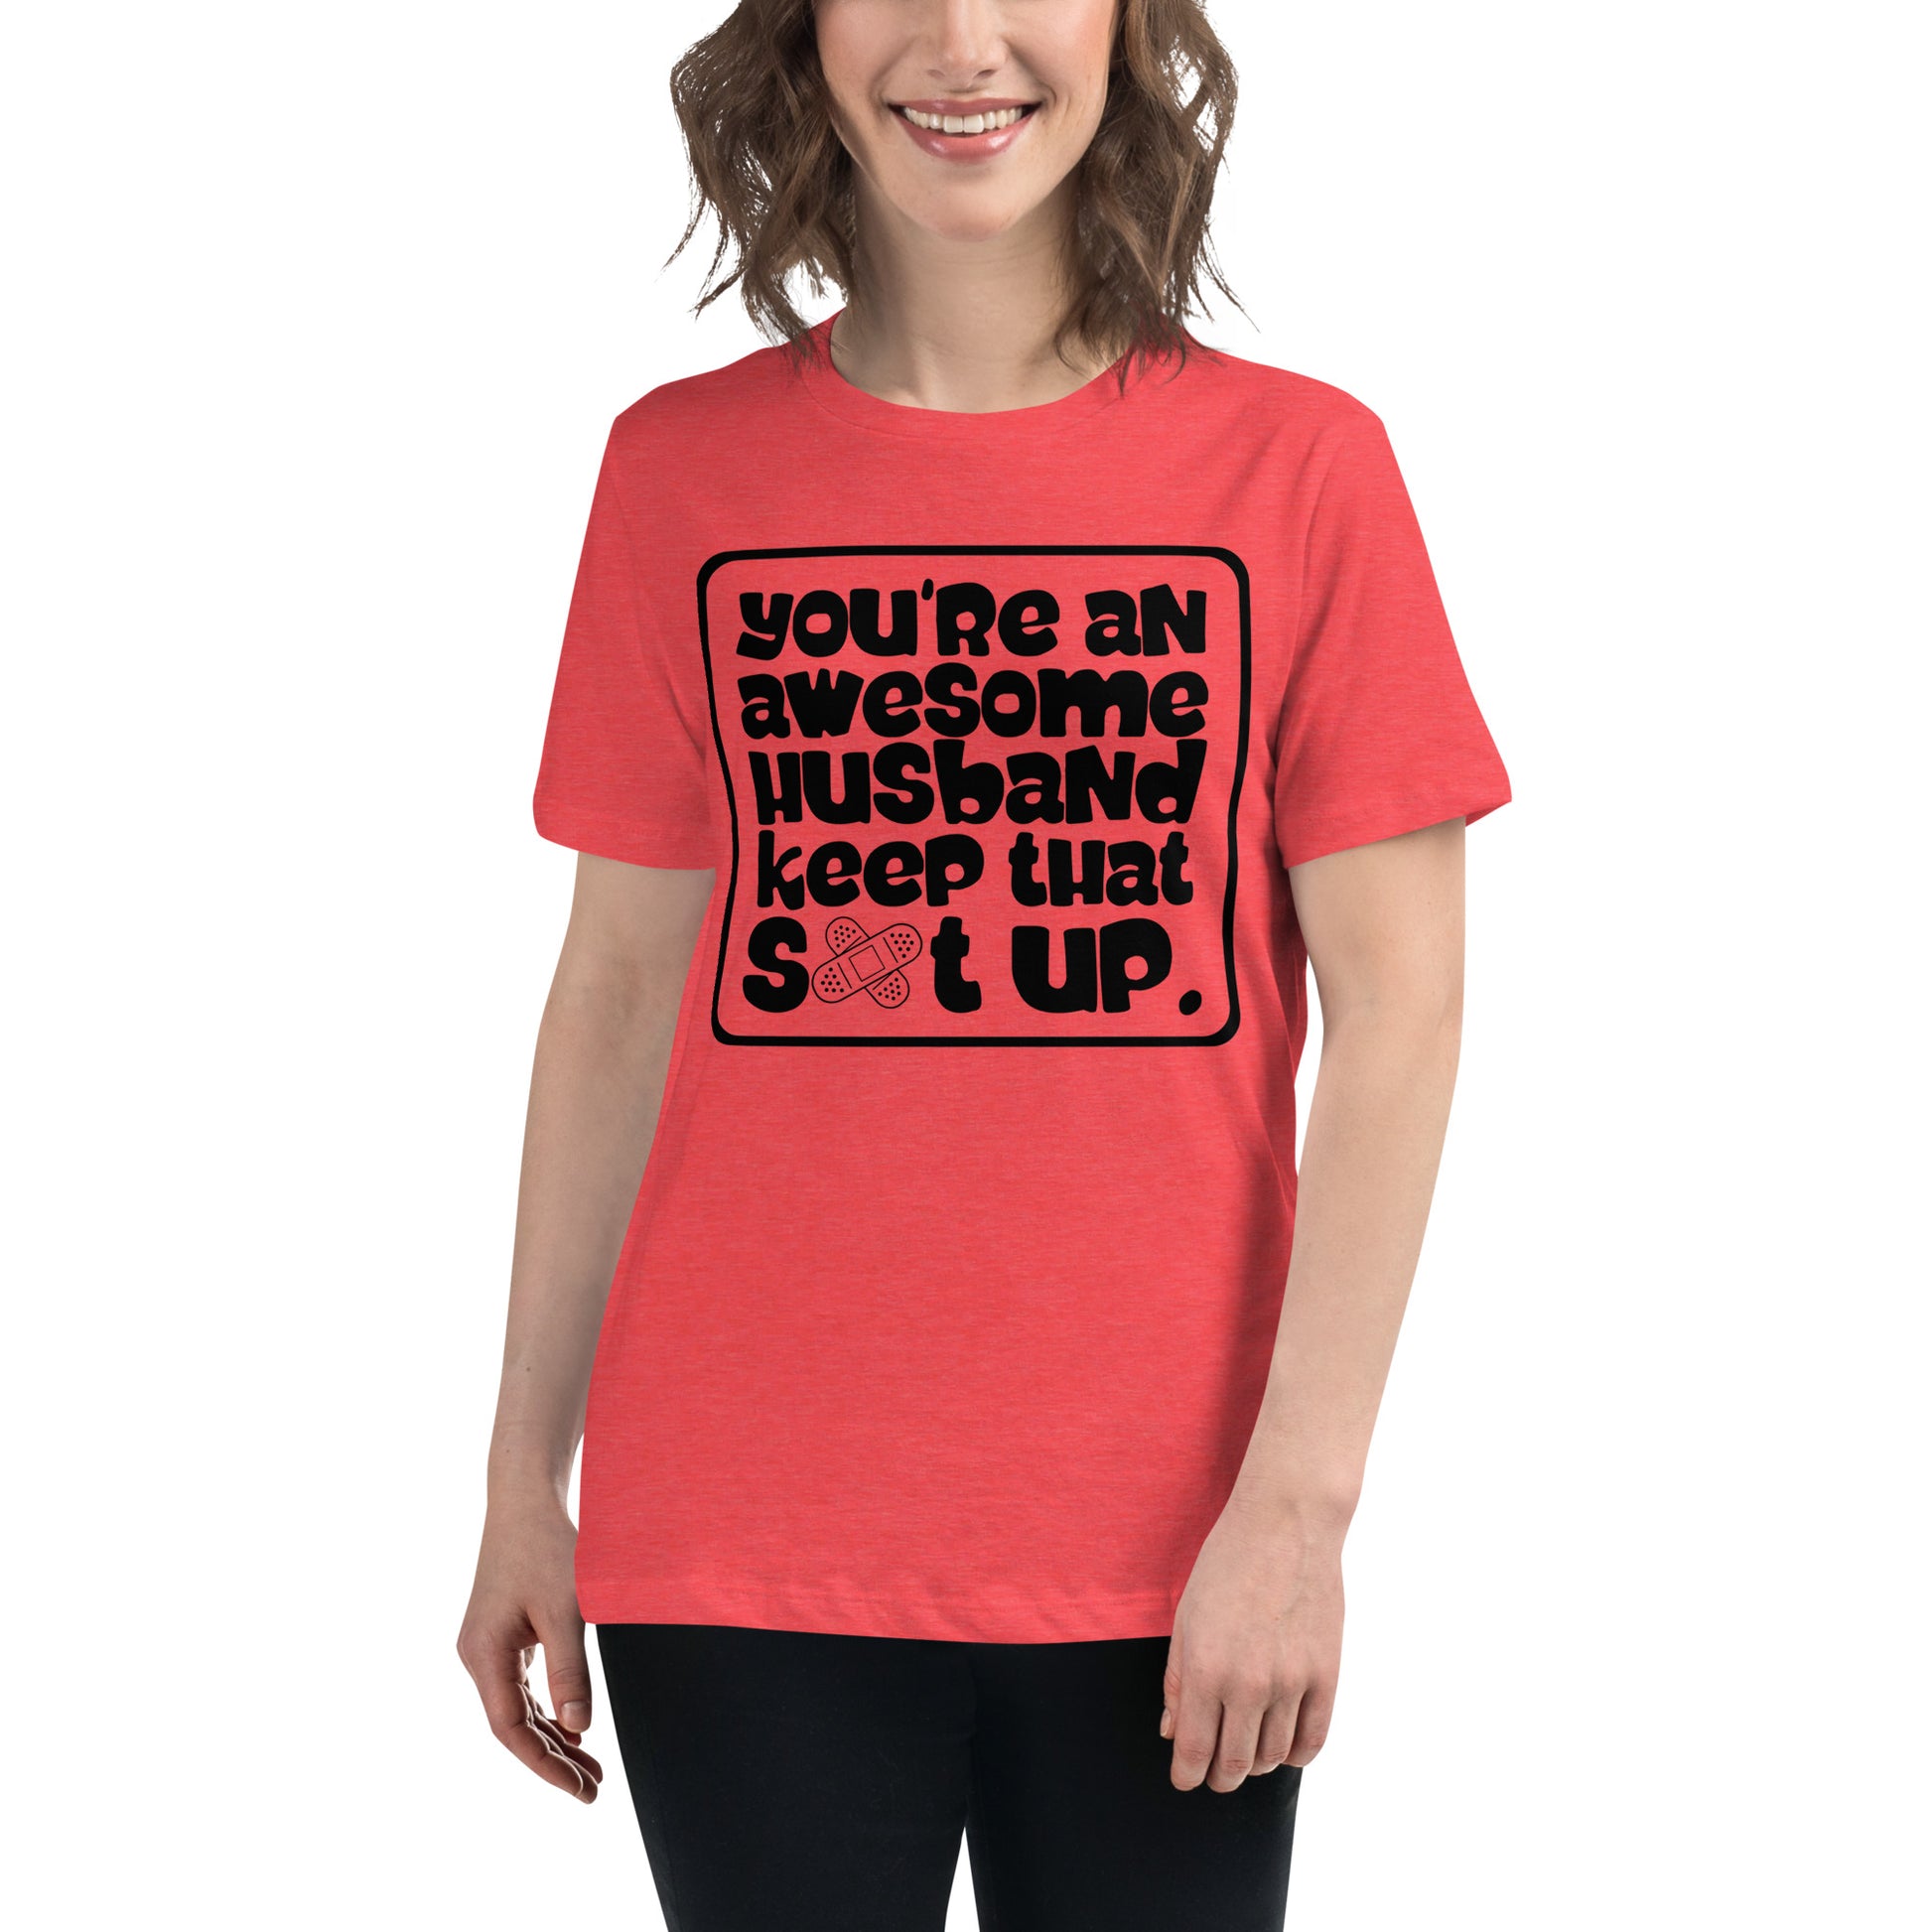 You're An Awesome Husband Keep That S*t Up Women's Relaxed T-Shirt